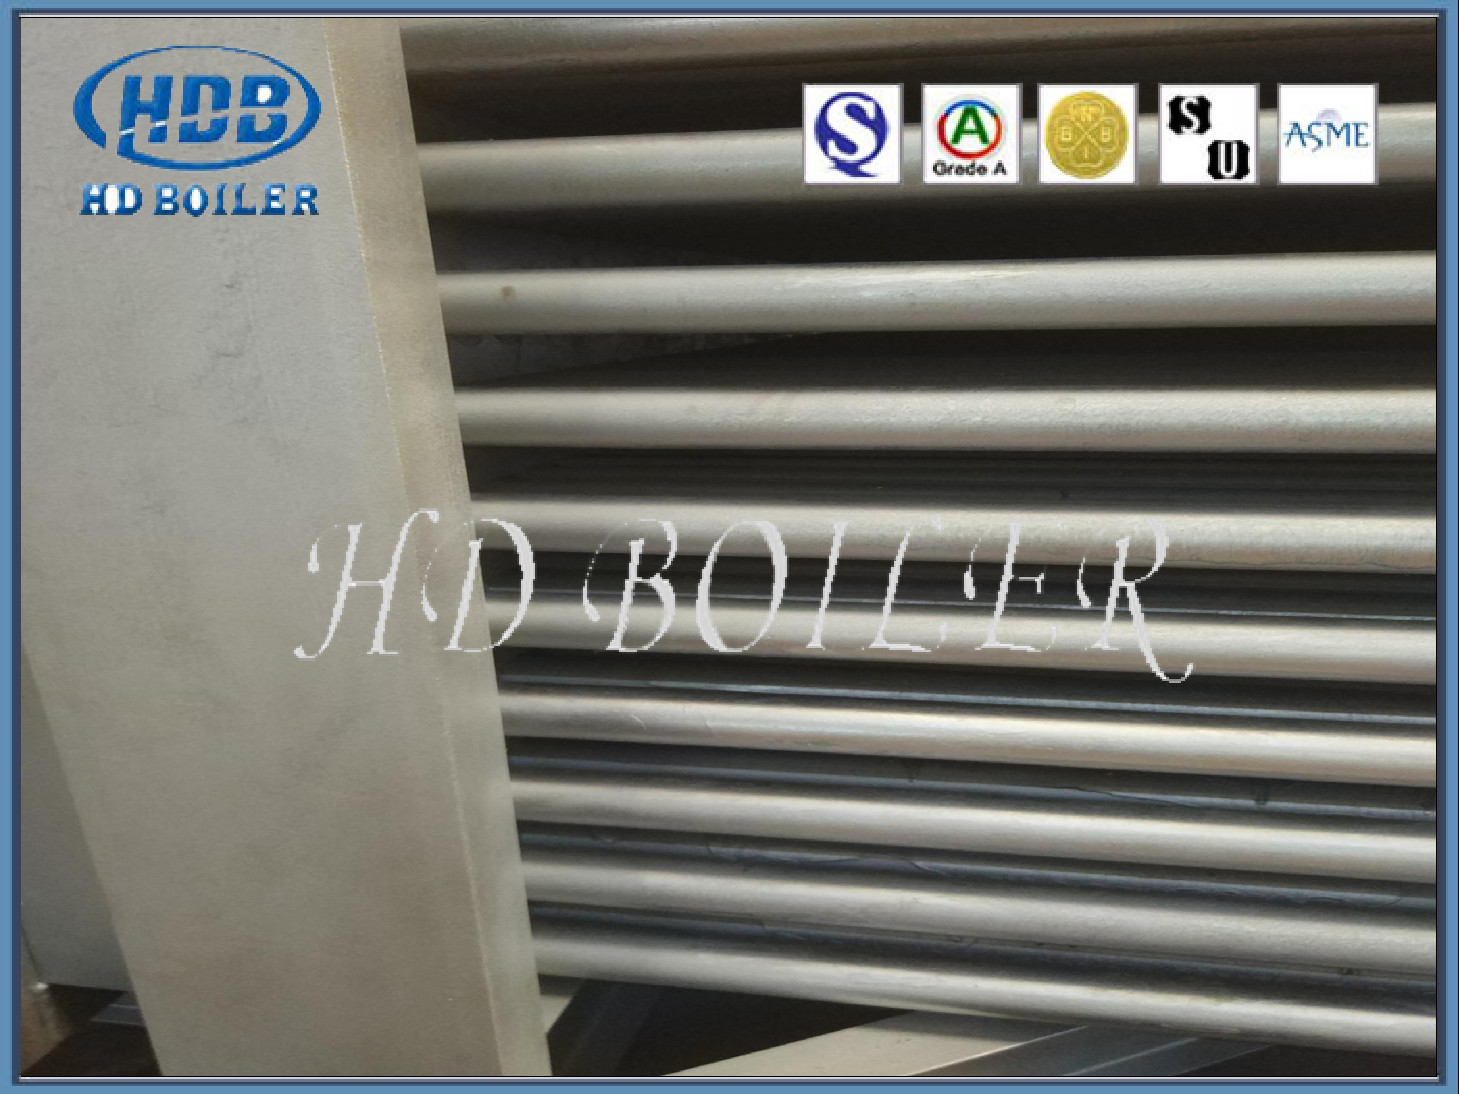 High Pressure Boiler Air Preheater For Power Plant Boiler And Industrial Application